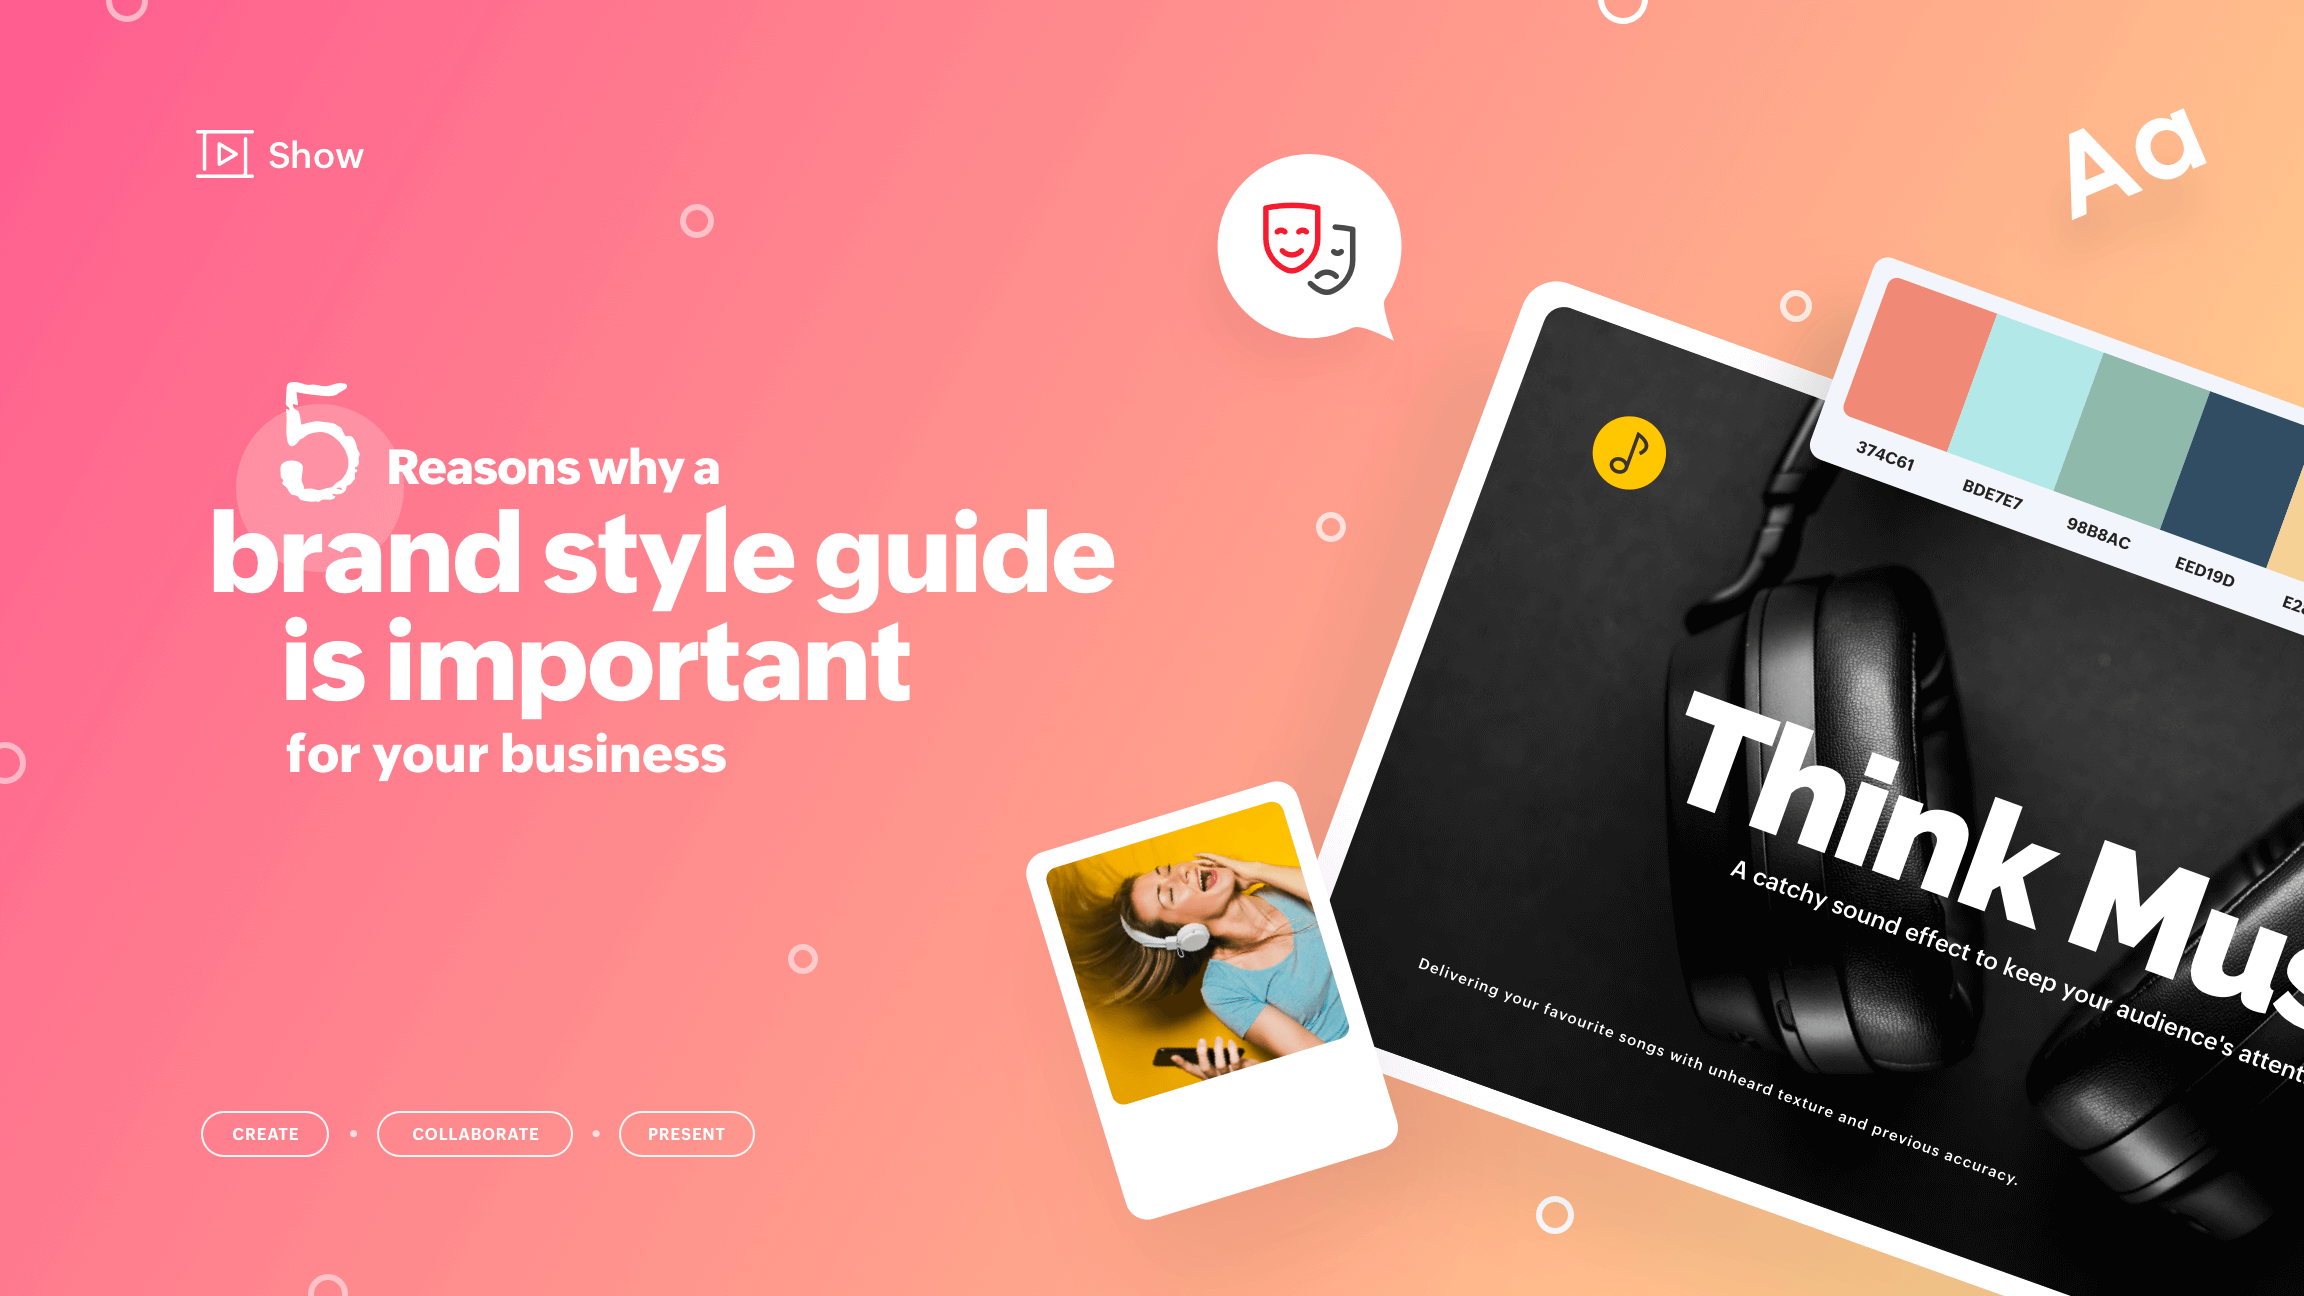 5 reasons why a brand style guide is important for your business